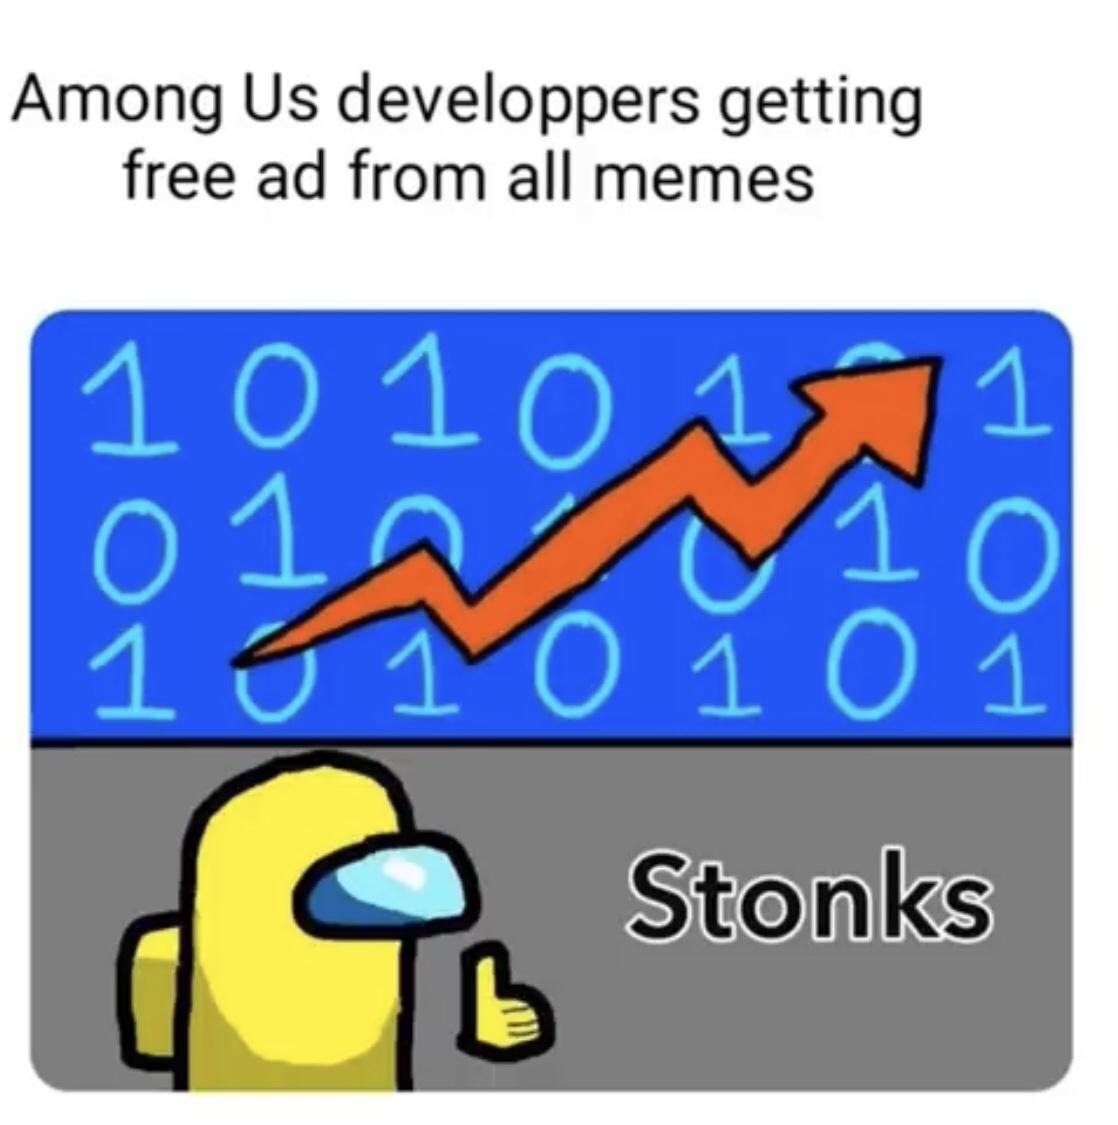 cartoon - Among Us developpers getting free ad from all memes 1010 1 01. 0101 Stonks